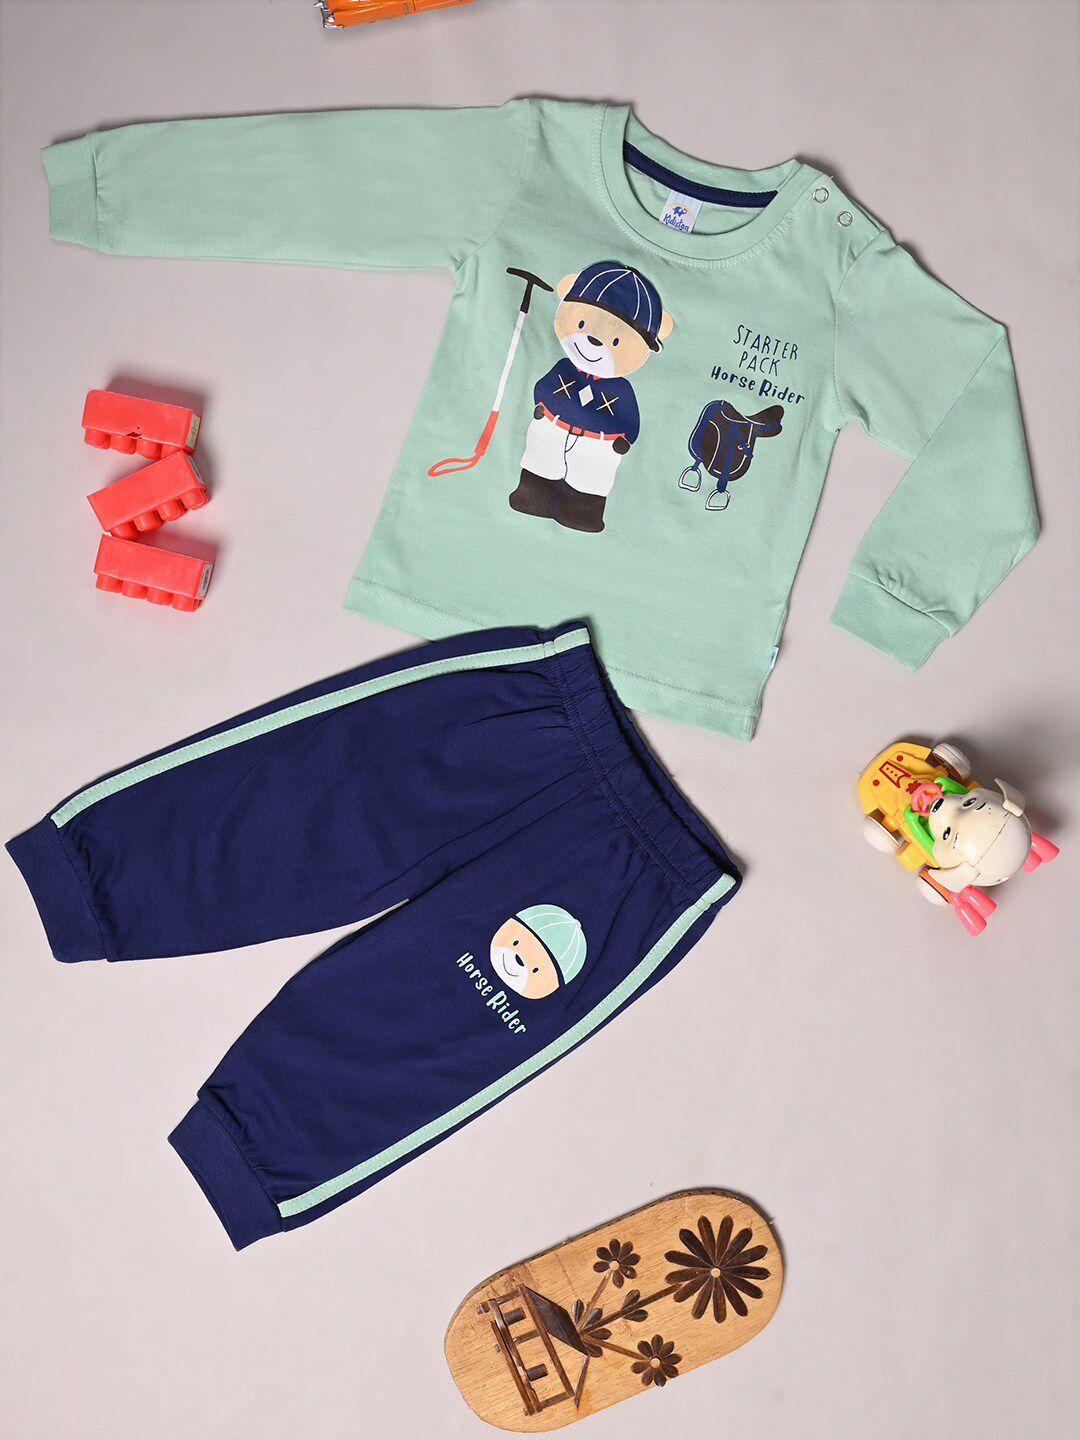 v-mart kids graphic printed t-shirt with trousers